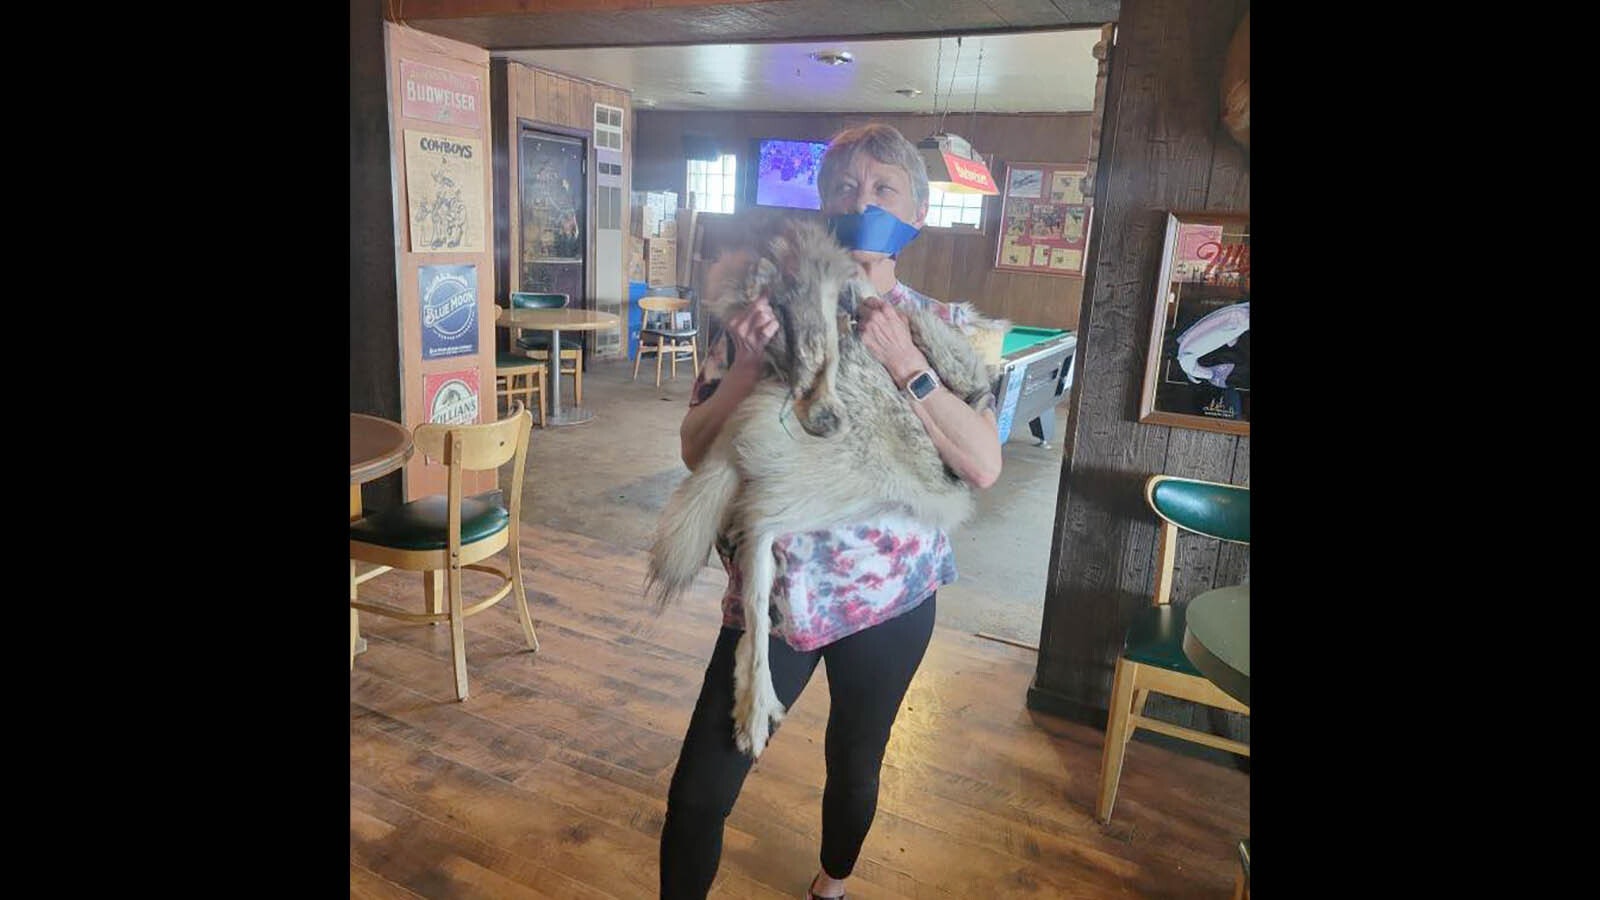 Jeanne Ivie-Roberts is the aunt of Daniel resident Cody Roberts, who's accused of mistreating a wolf before killing it. She has expressed support for her nephew and seems to mock the situation by posing for a photo with a wolf pelt and her mouth taped shut.